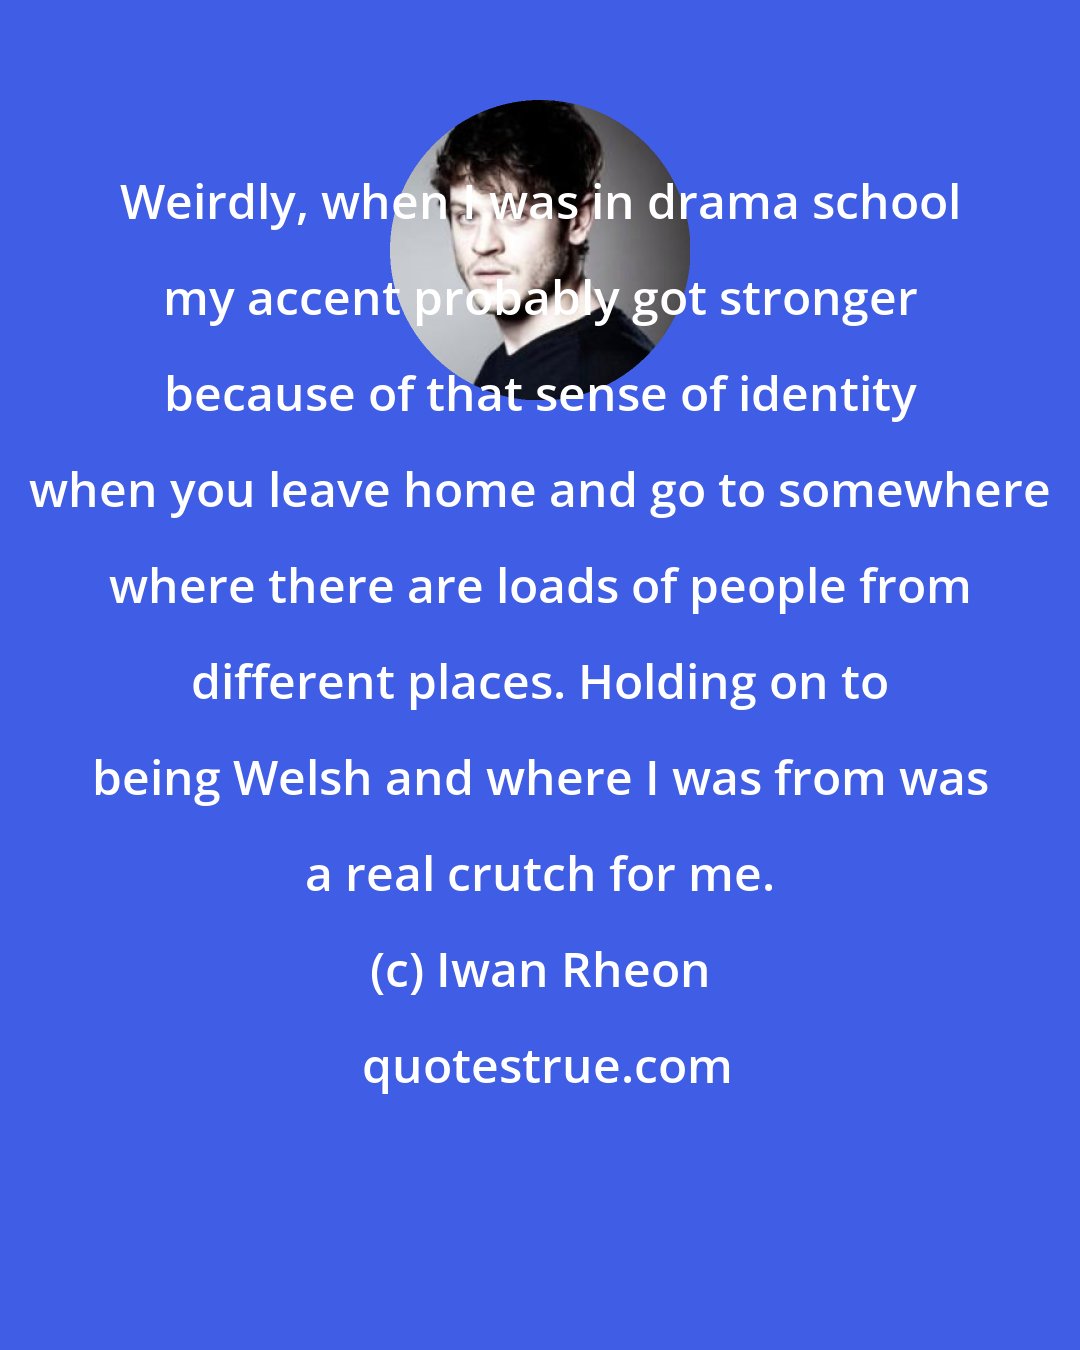 Iwan Rheon: Weirdly, when I was in drama school my accent probably got stronger because of that sense of identity when you leave home and go to somewhere where there are loads of people from different places. Holding on to being Welsh and where I was from was a real crutch for me.